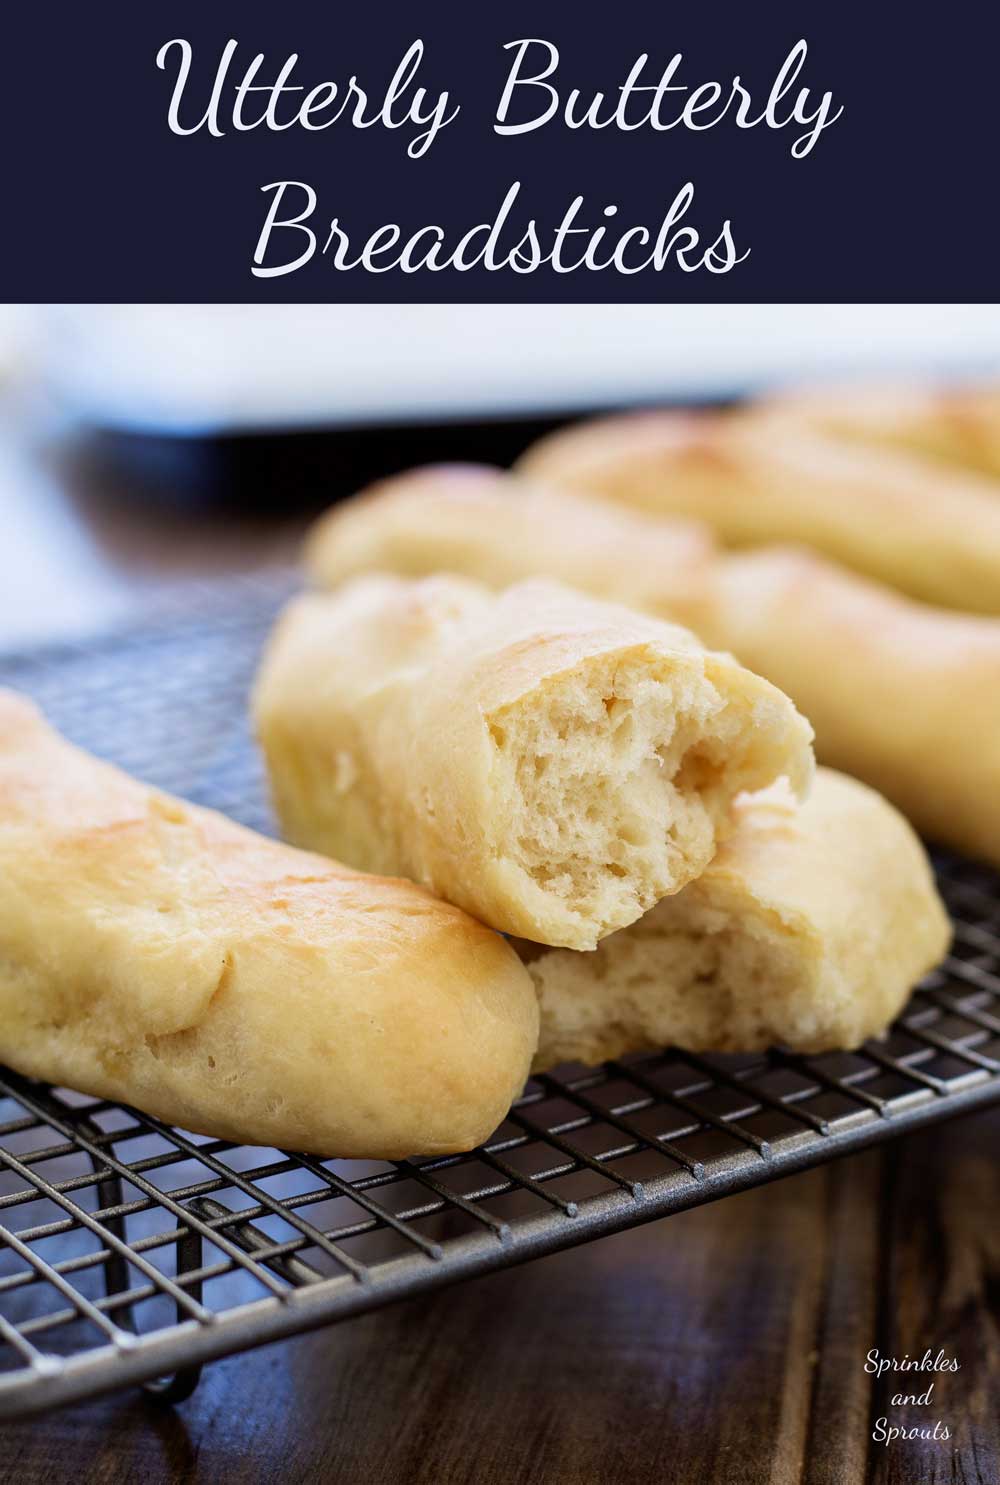 Soft, fluffy and buttery breadsticks. You'll be amazed how simple it is to have restaurant quality fresh bread at home with my secret but simple final step.